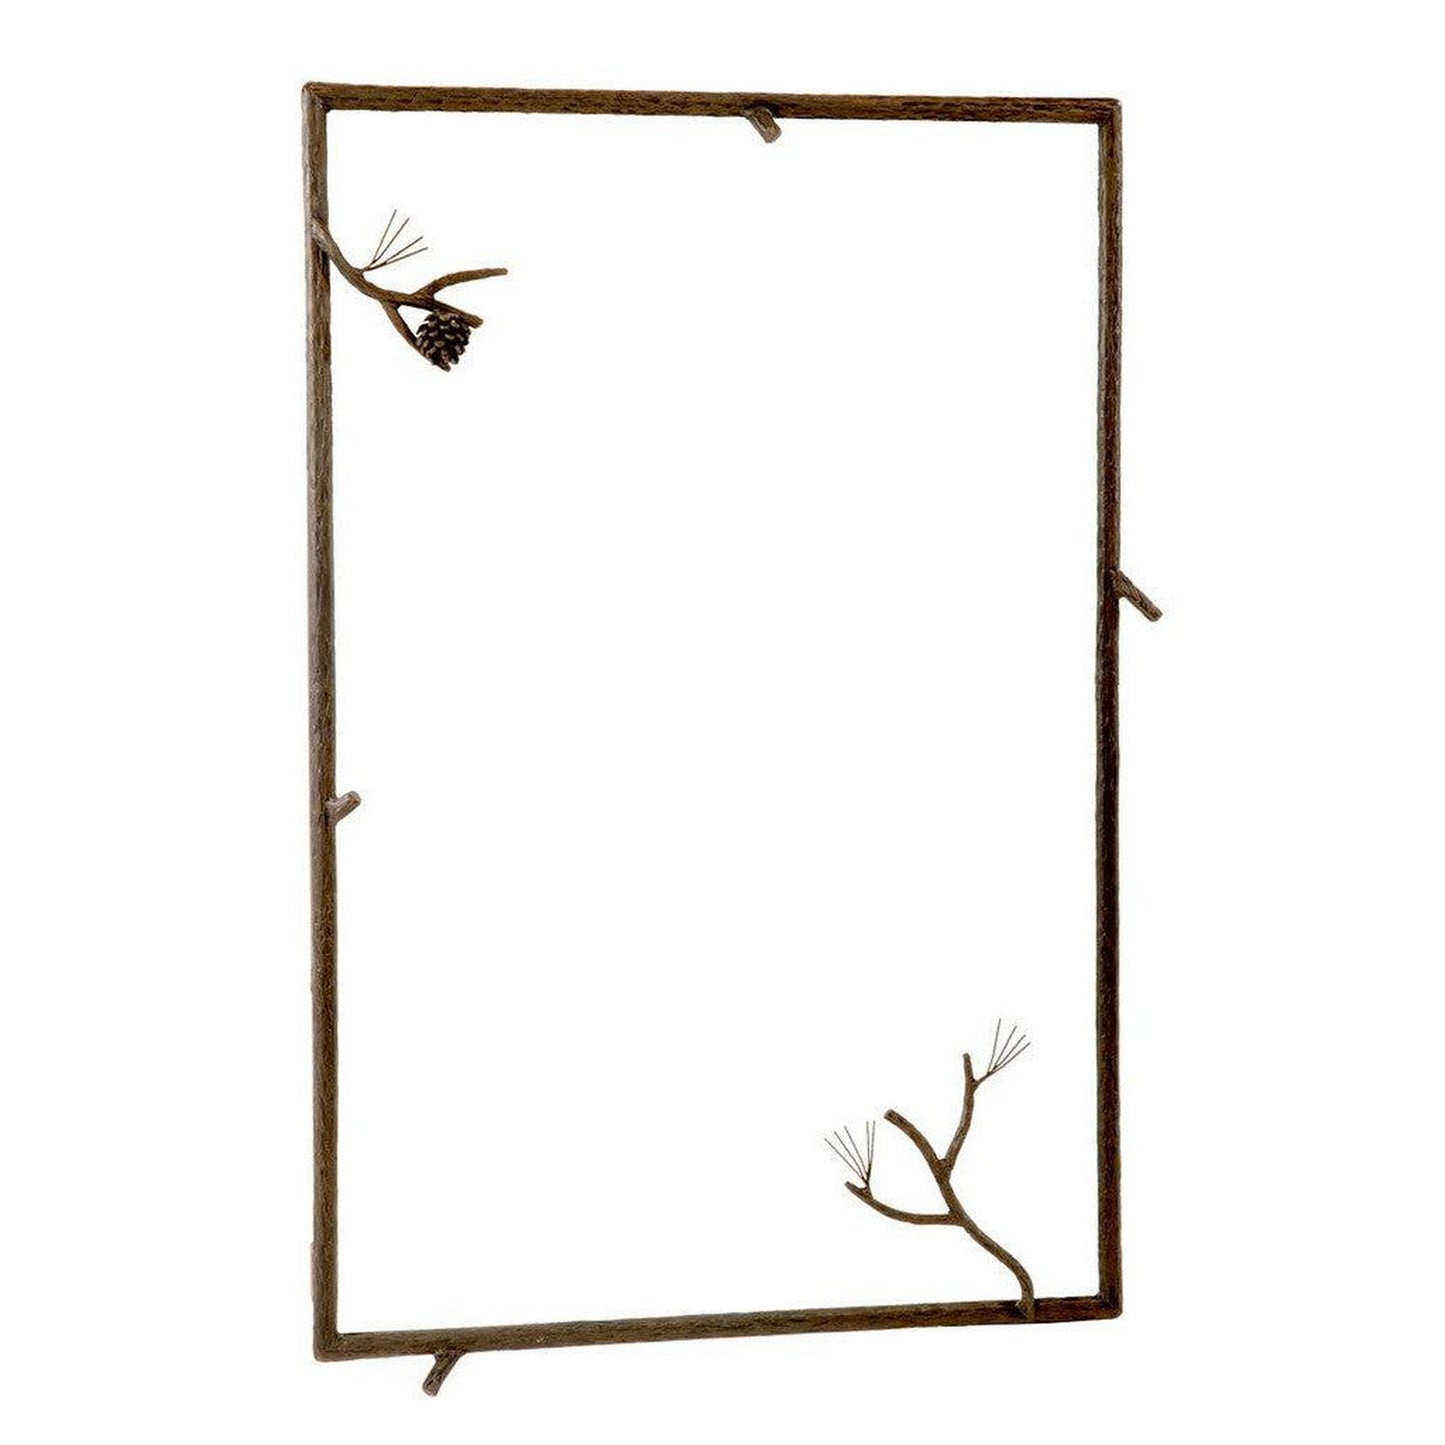 Stone County Ironworks Pine 25" x 21" Small Hand Rubbed Bronze Iron Wall Mirror With Pewter Iron Accent